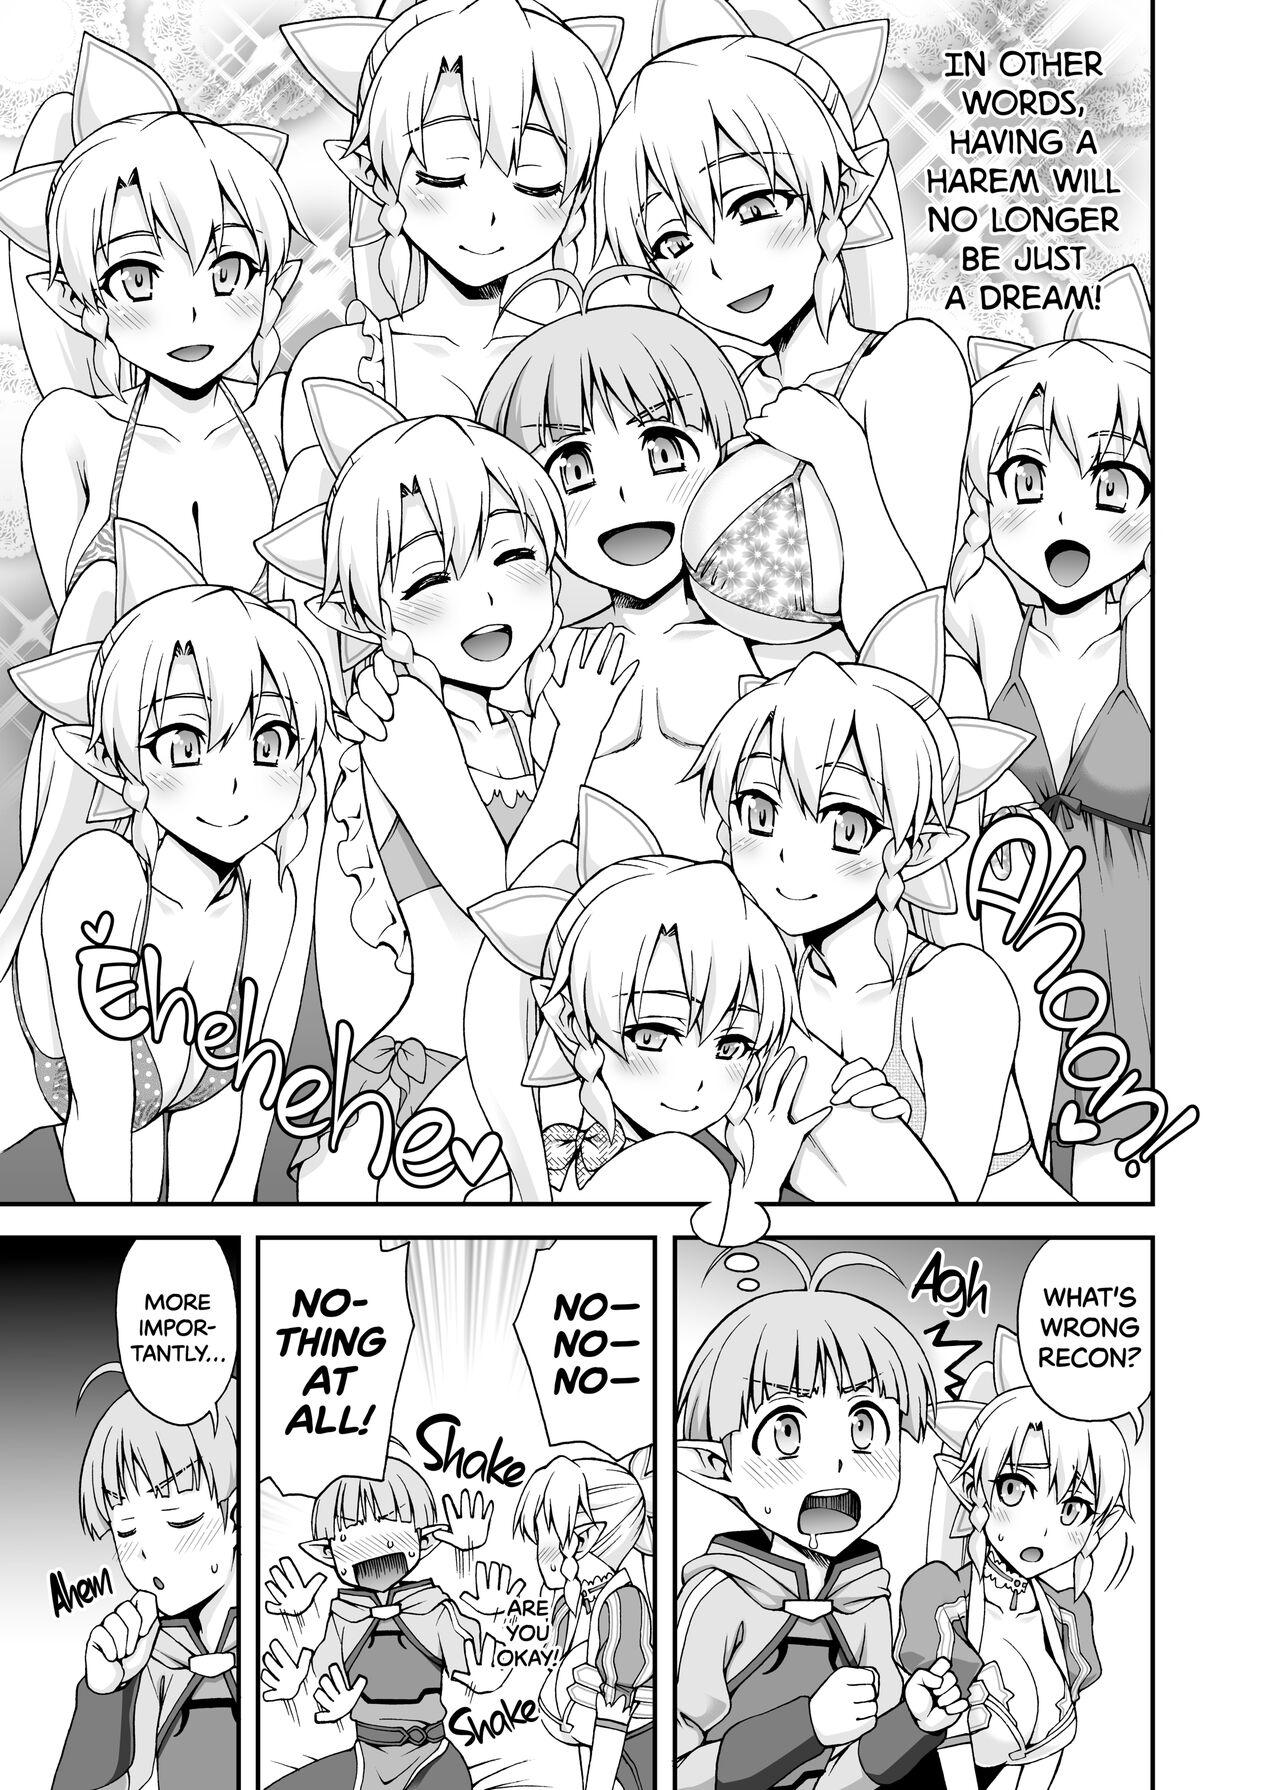 Throatfuck Delphinium Madonna 2 - Sword art online Family Roleplay - Page 8